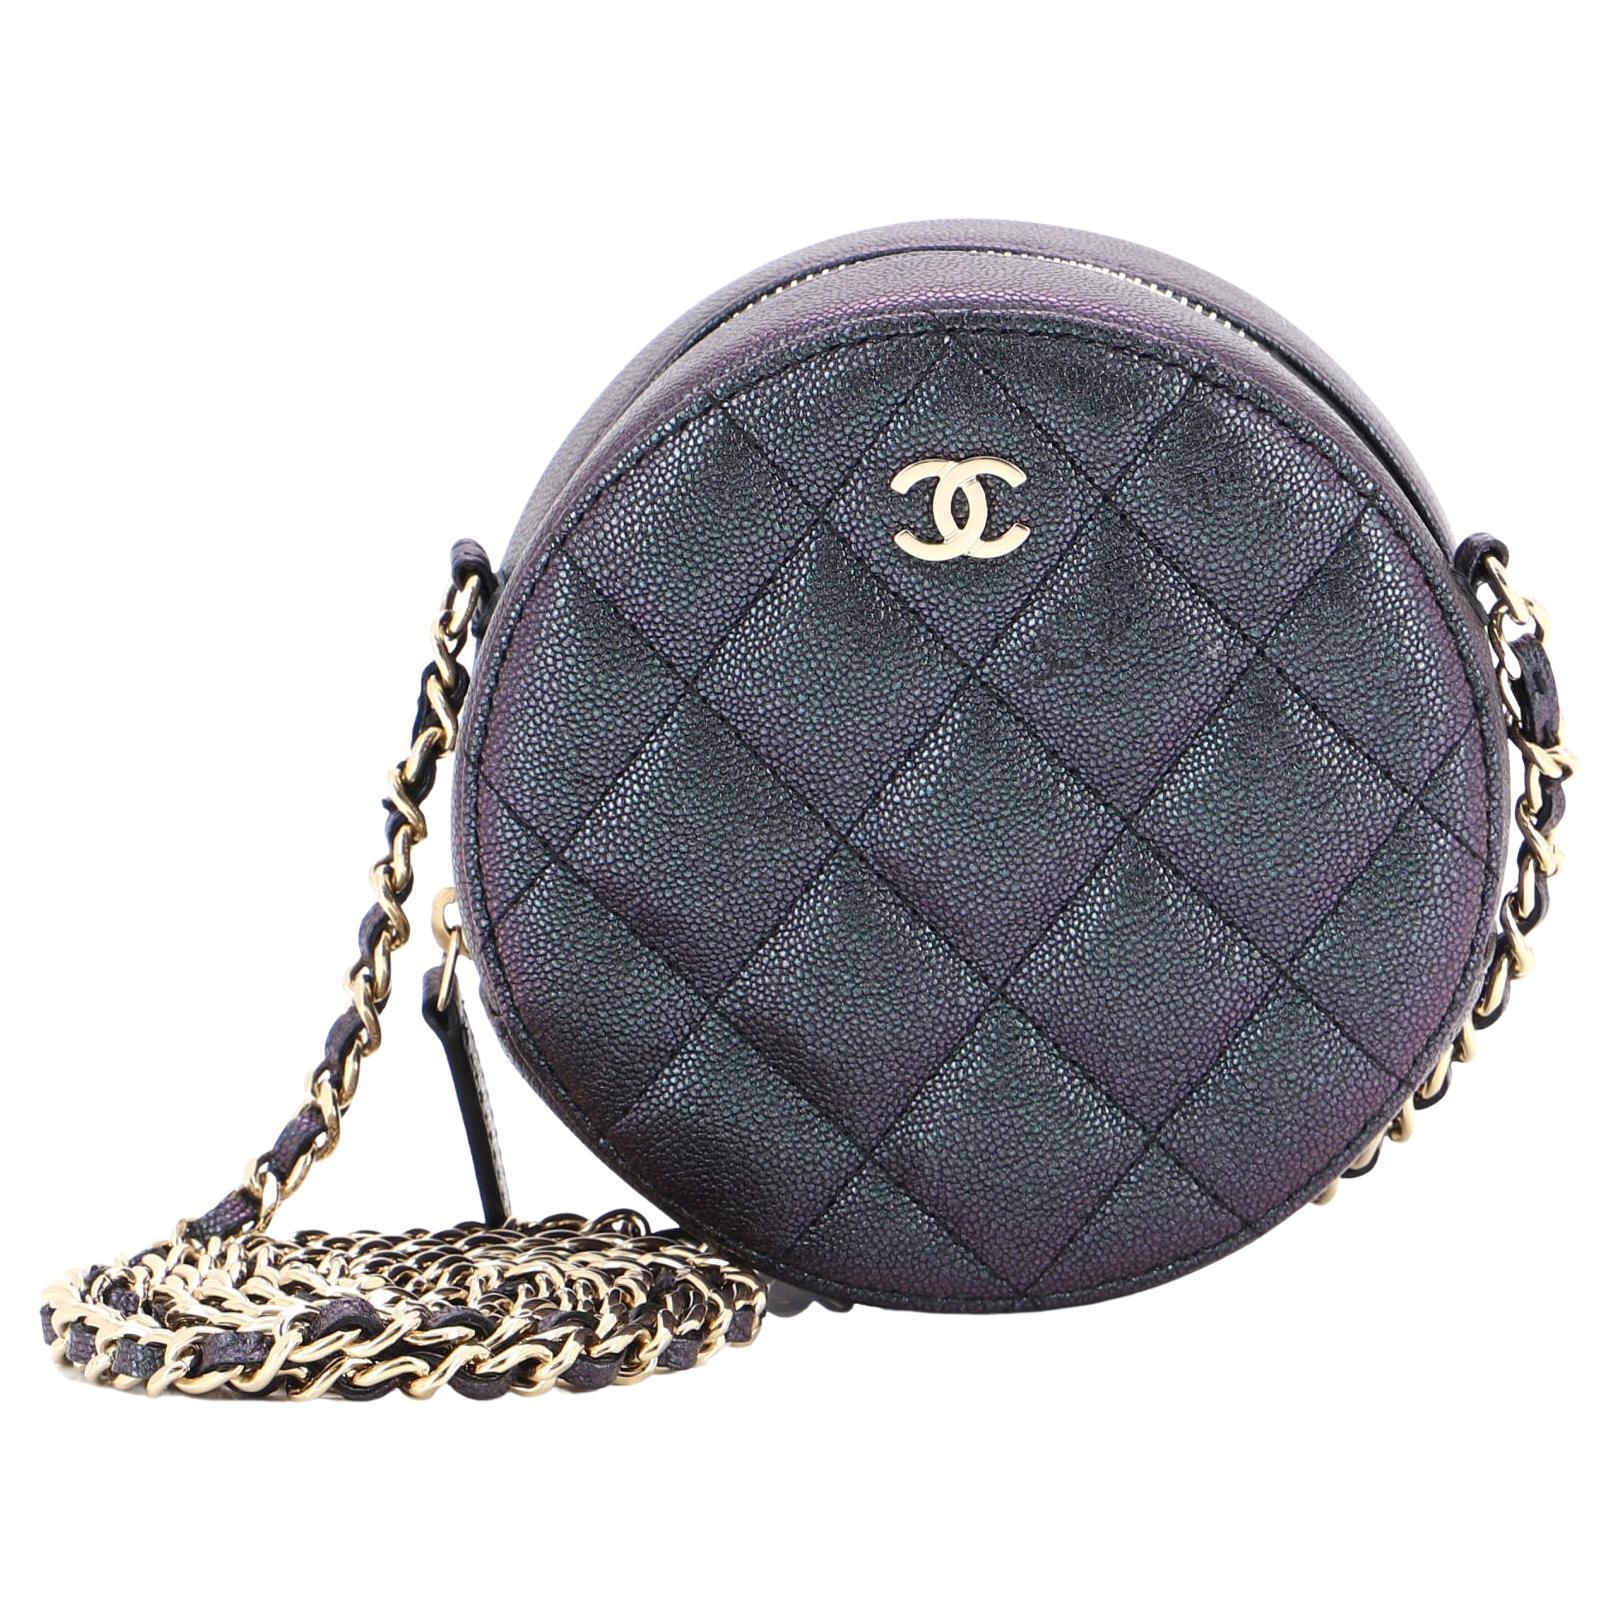 Chanel Round Quilted Caviar Leather Clutch Bag